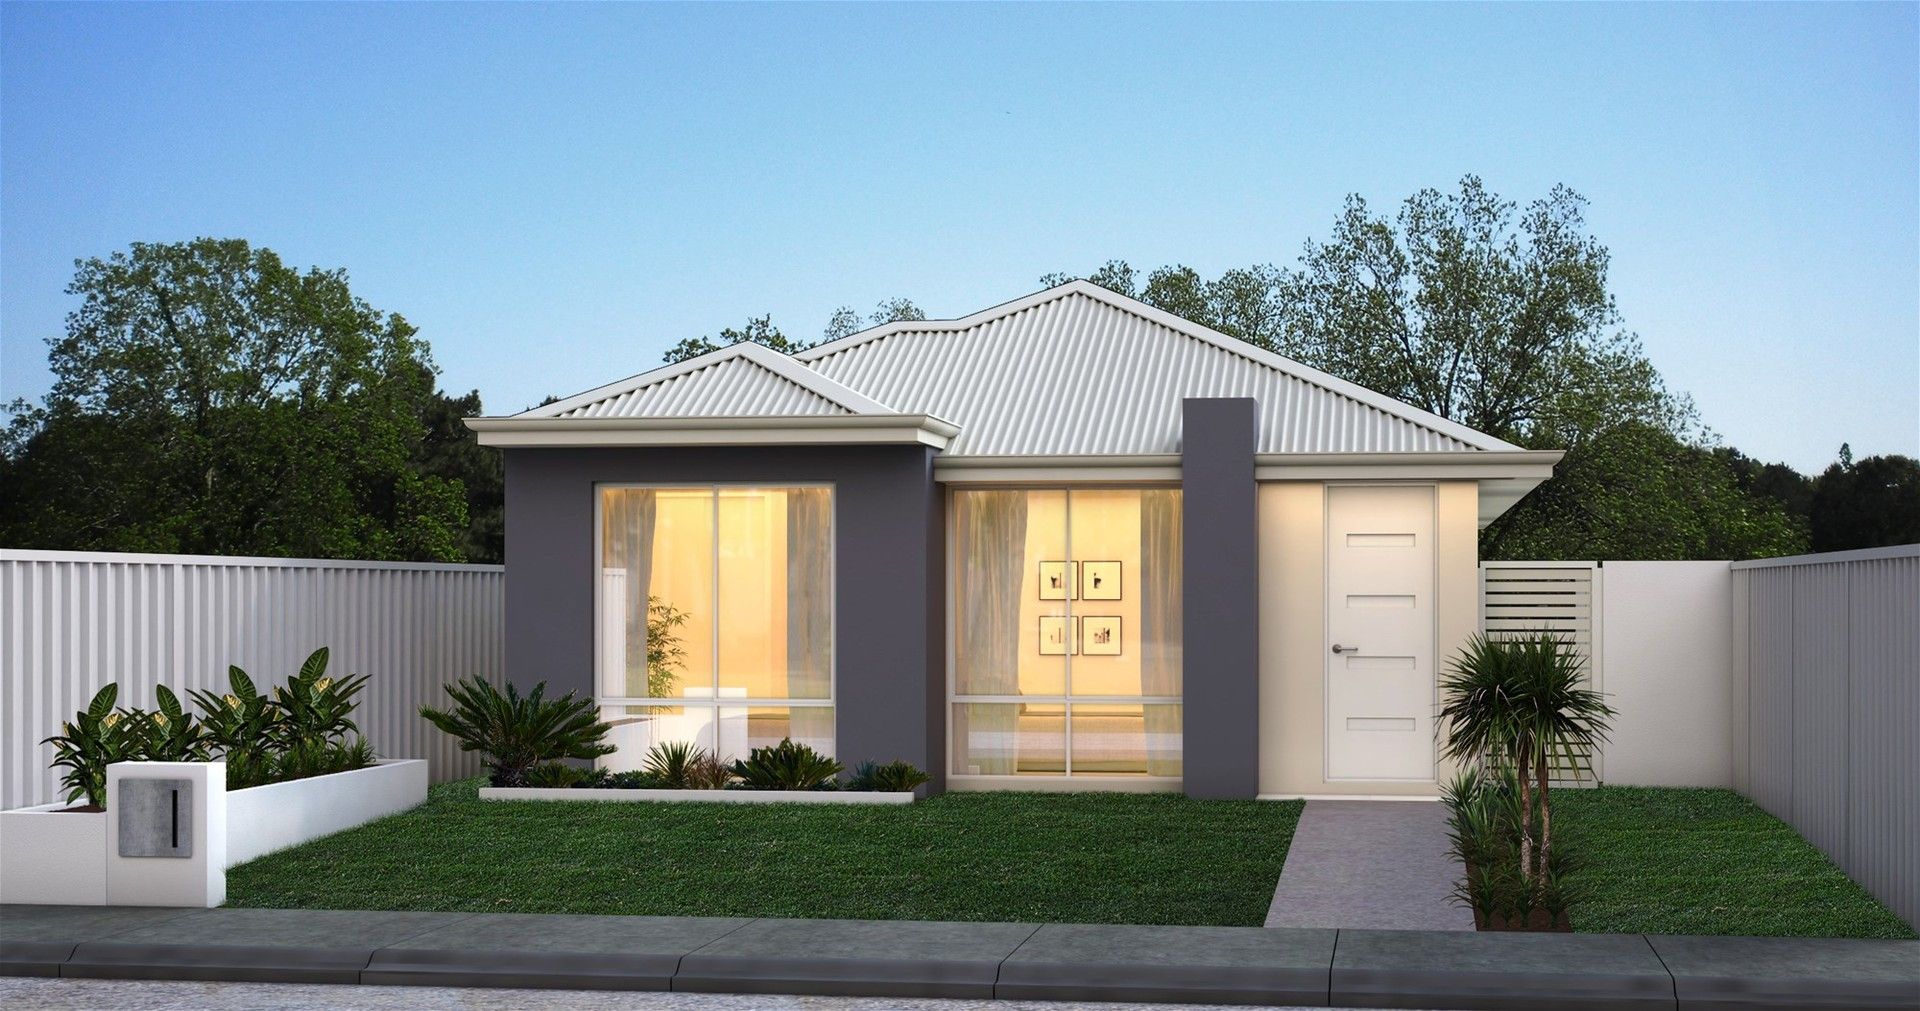 4 bedrooms New House & Land in 1104 Conjola Street YANCHEP WA, 6035